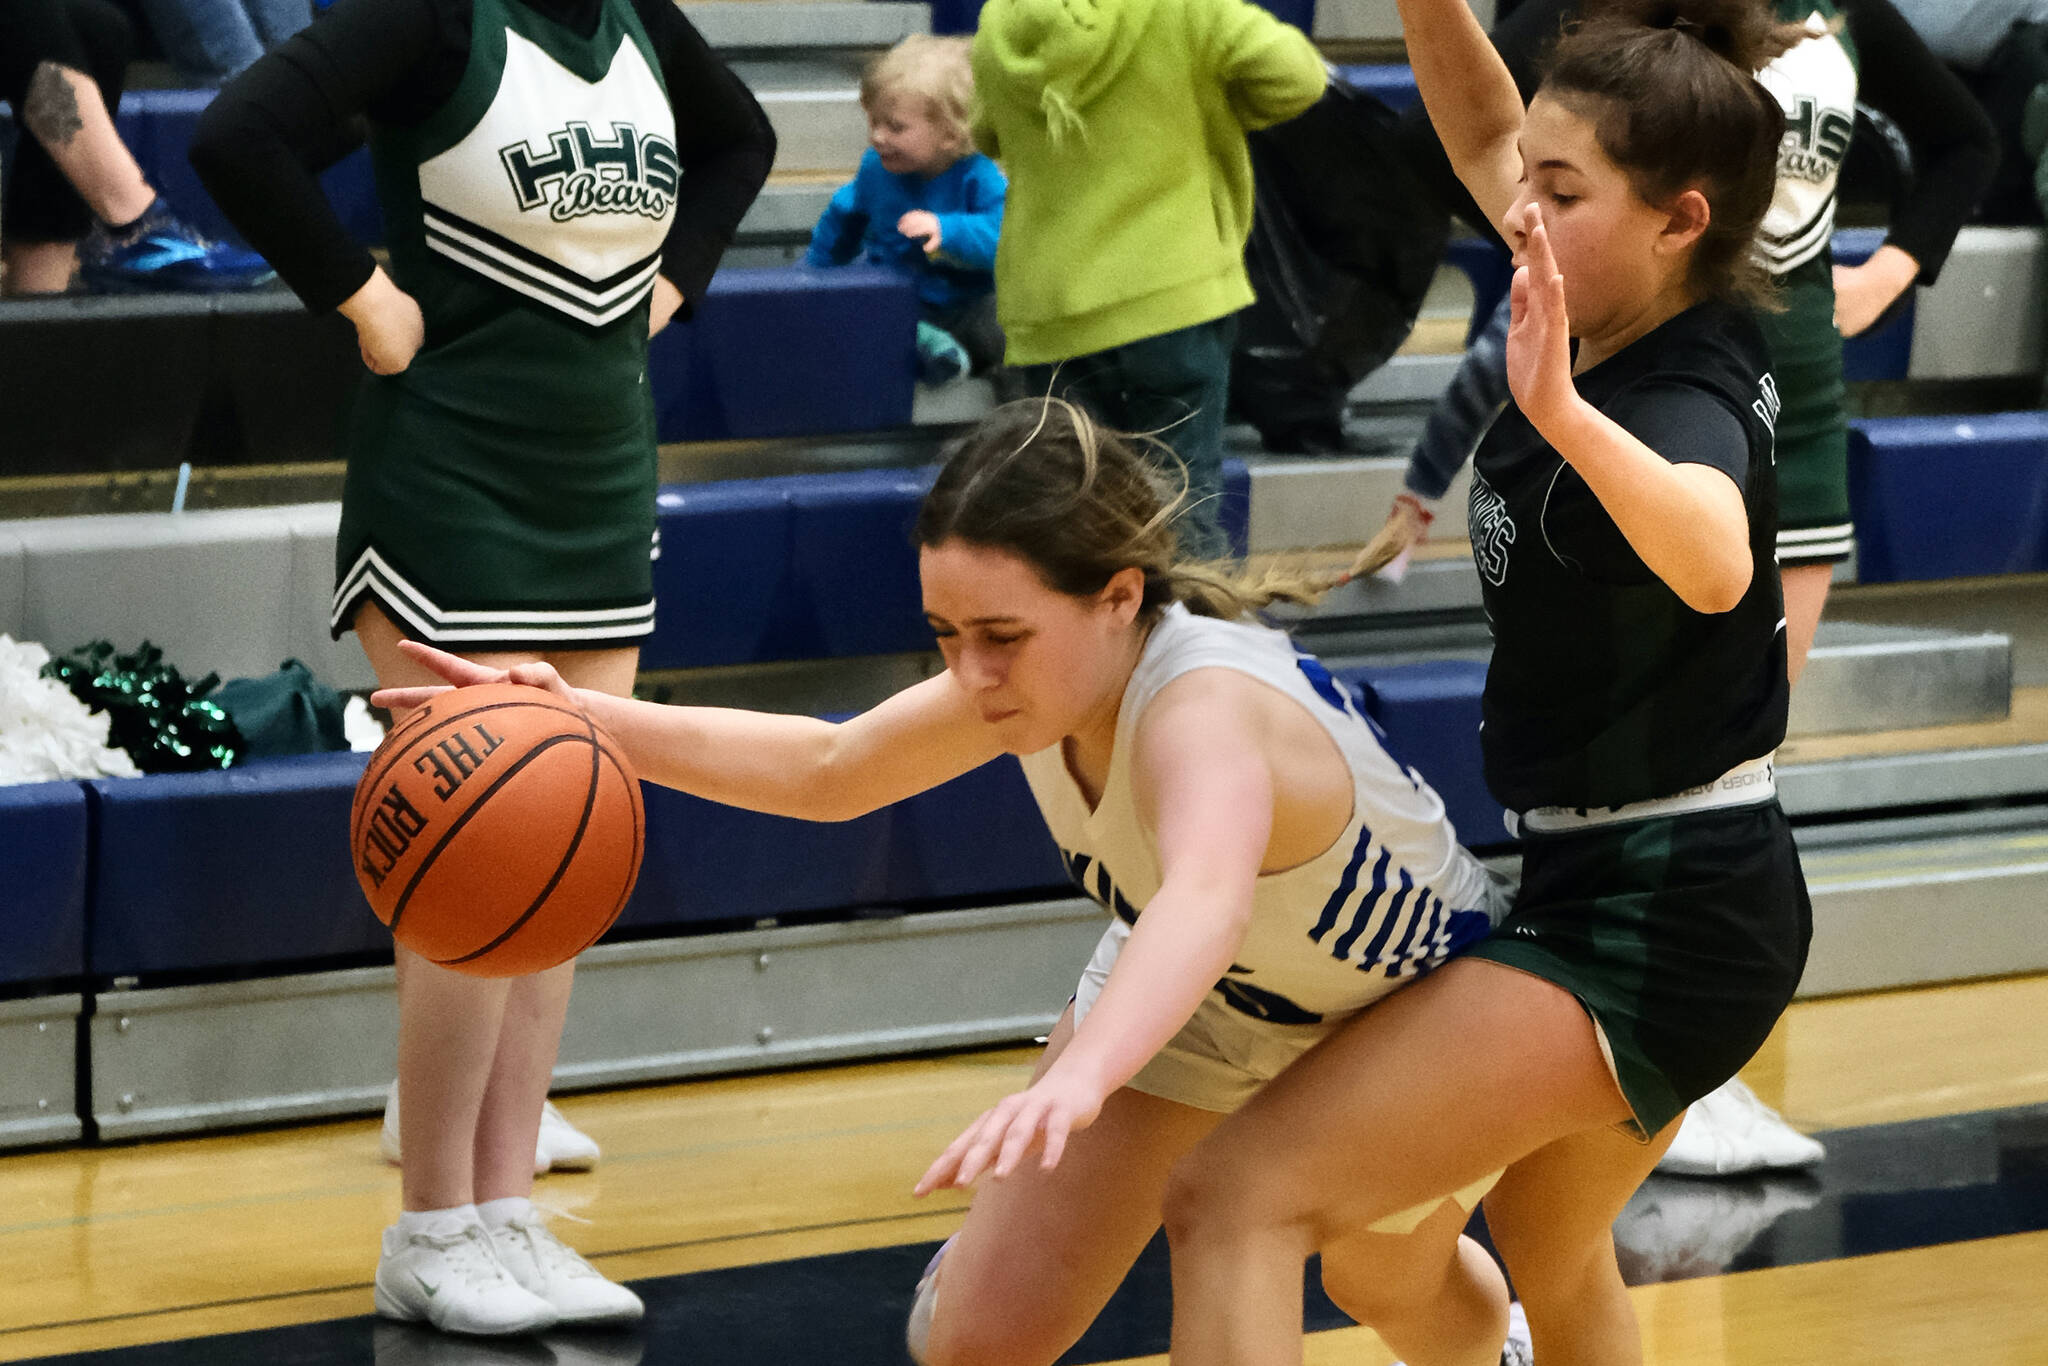 Petersburg junior Bryanna Ratliff is fouled by Haines sophomore Ari’el Godinez Long during the Region V basketball tournament on Thursday. Haines eliminated Petersburg from the tournament 38-16. (Klas Stolpe / For the Juneau Empire)